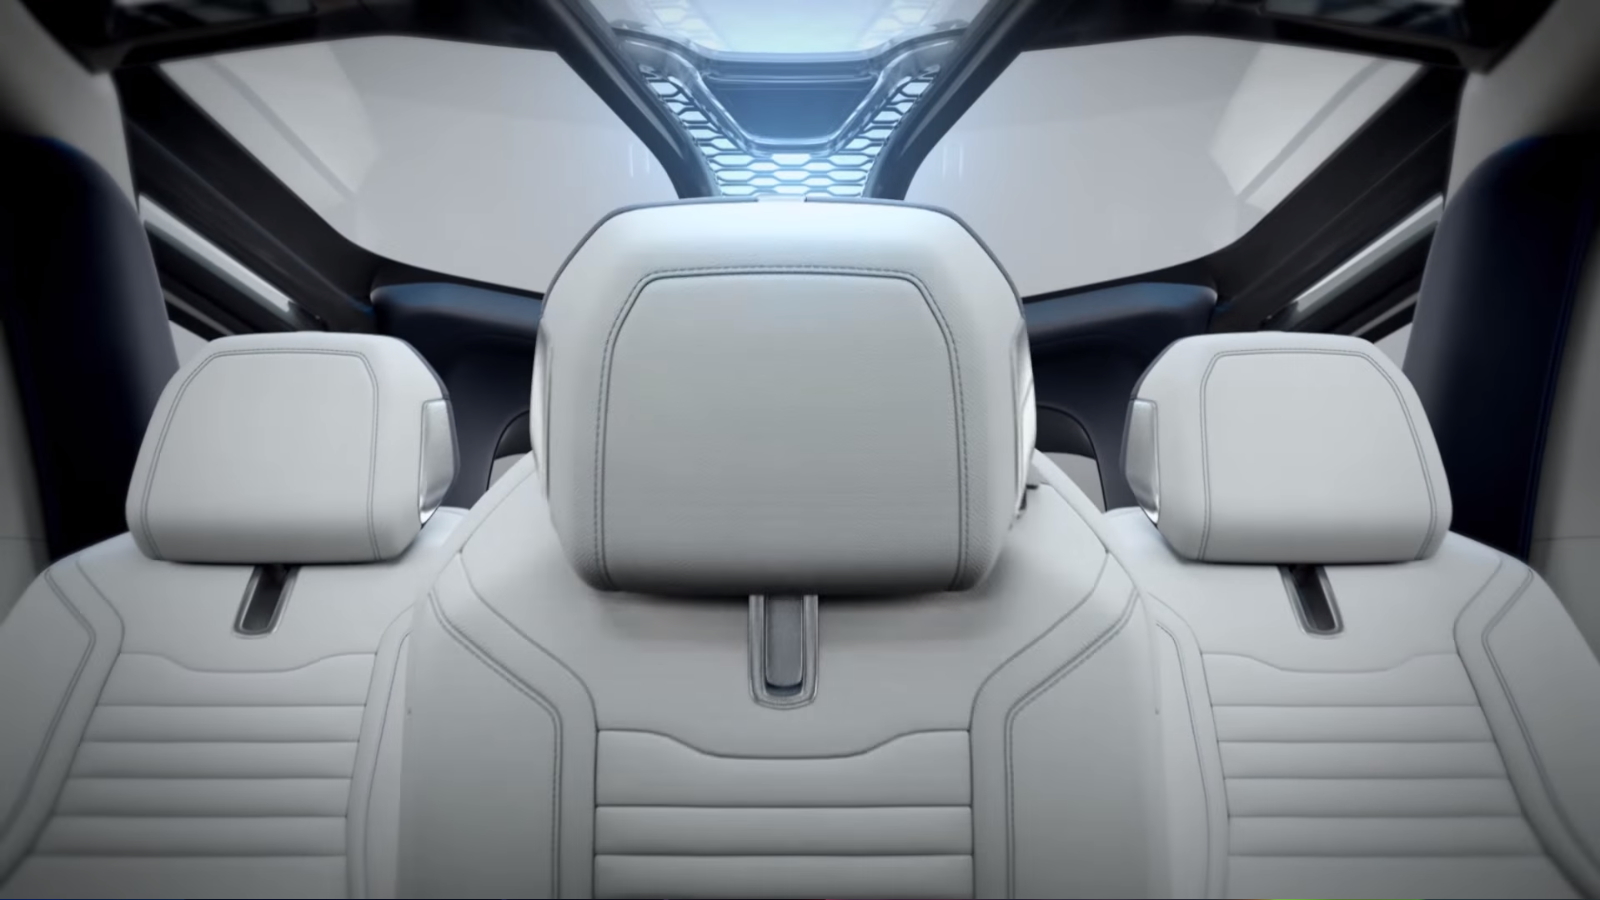 Land Rover New Discovery Vision interior seat view